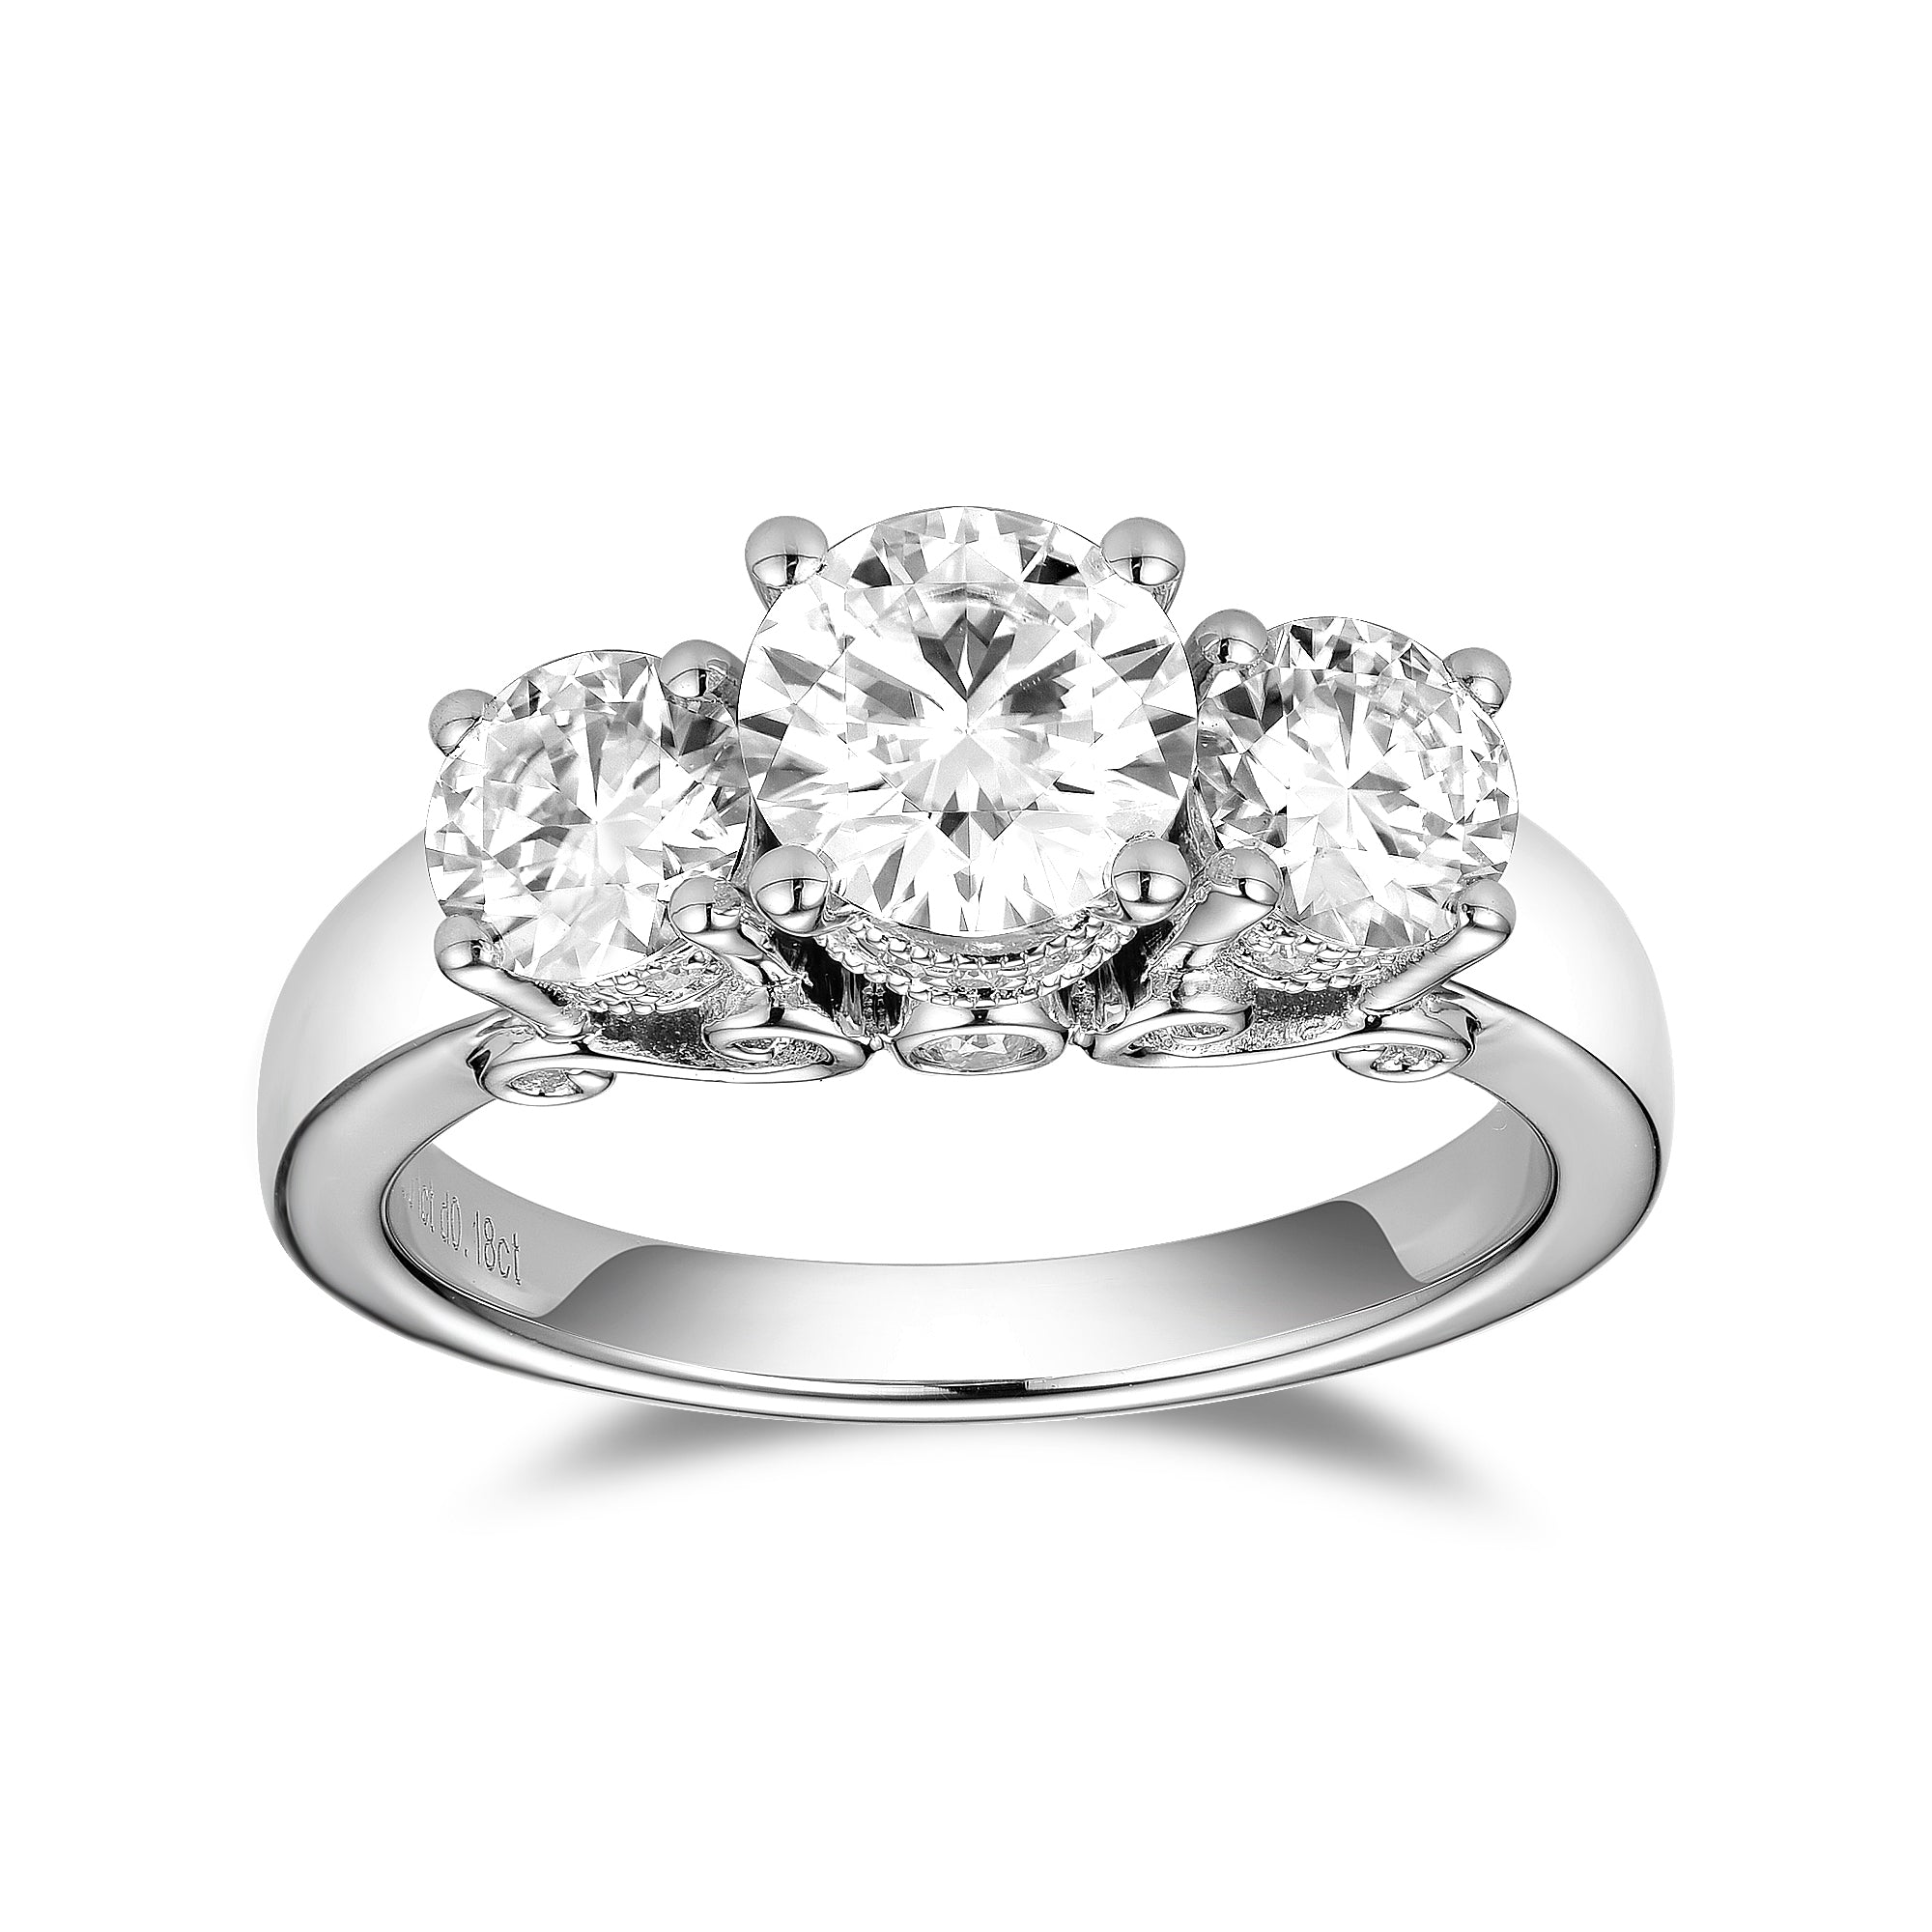 DovEggs sterling silver 2 carat three stone round moissanite engagement ring